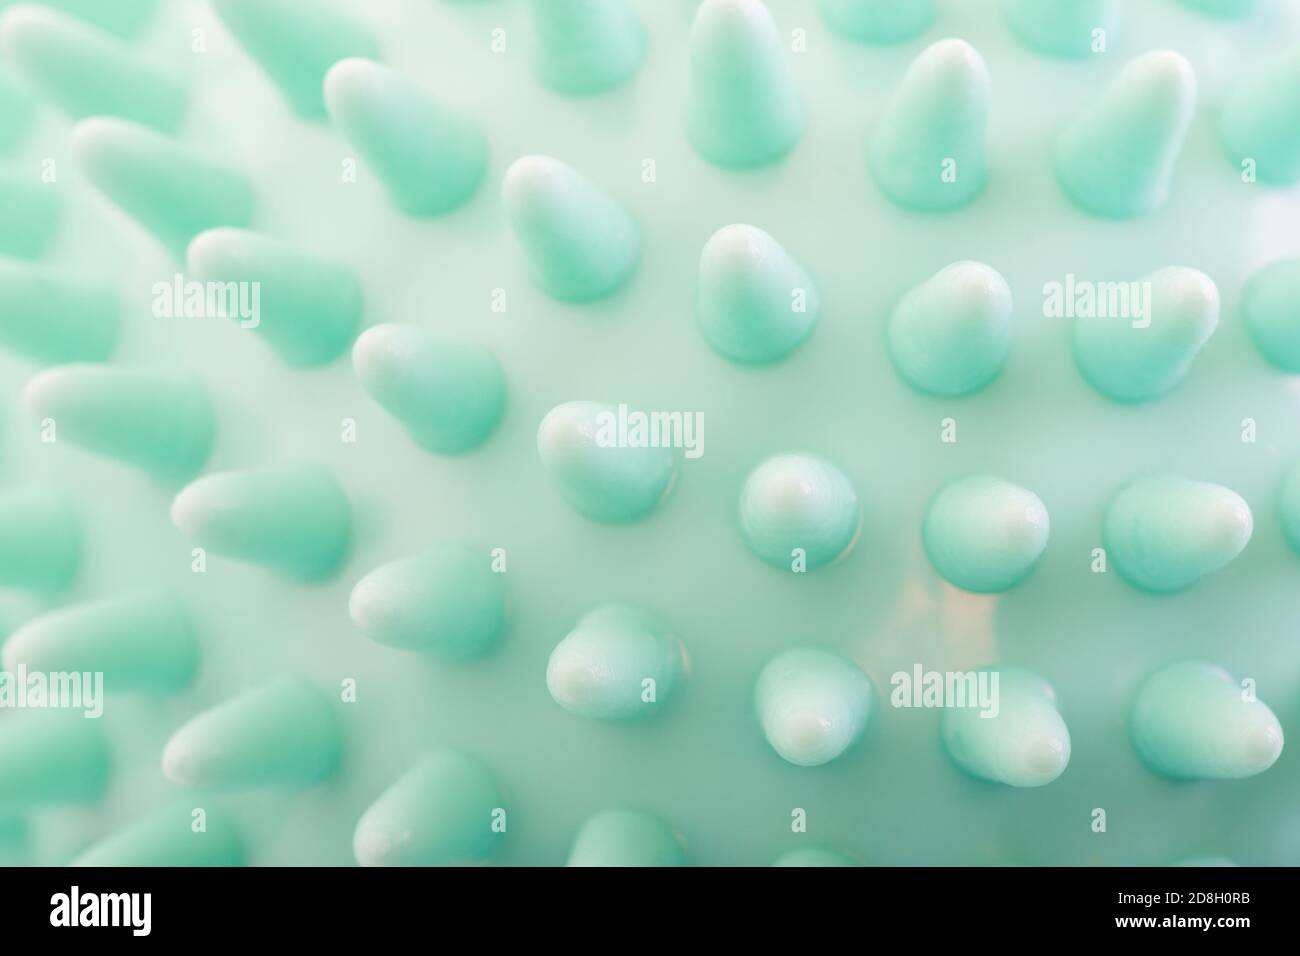 Extreme close up of a Yoga or Pilates ball, with all the little spikes showing. It can be used as an abstract background too. Stock Photo